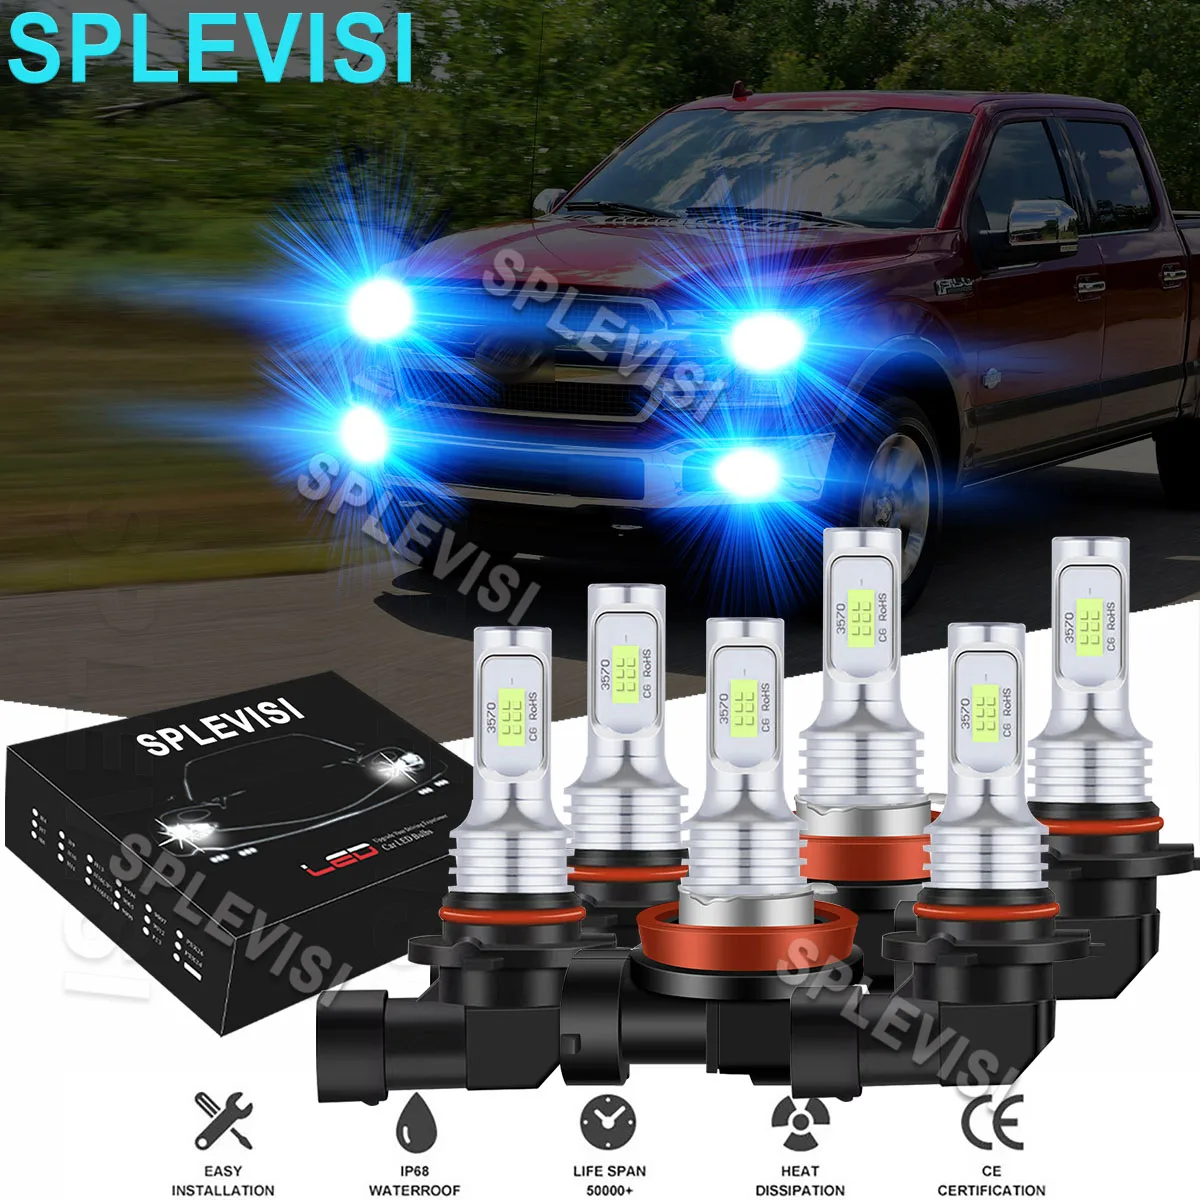 LED 8000K Ice Blue Headlight Fog Light Bulbs Fit For Ford F150 2015-2021 Dodge Charger 2006-2008 Toyota Tundra 2007-2013